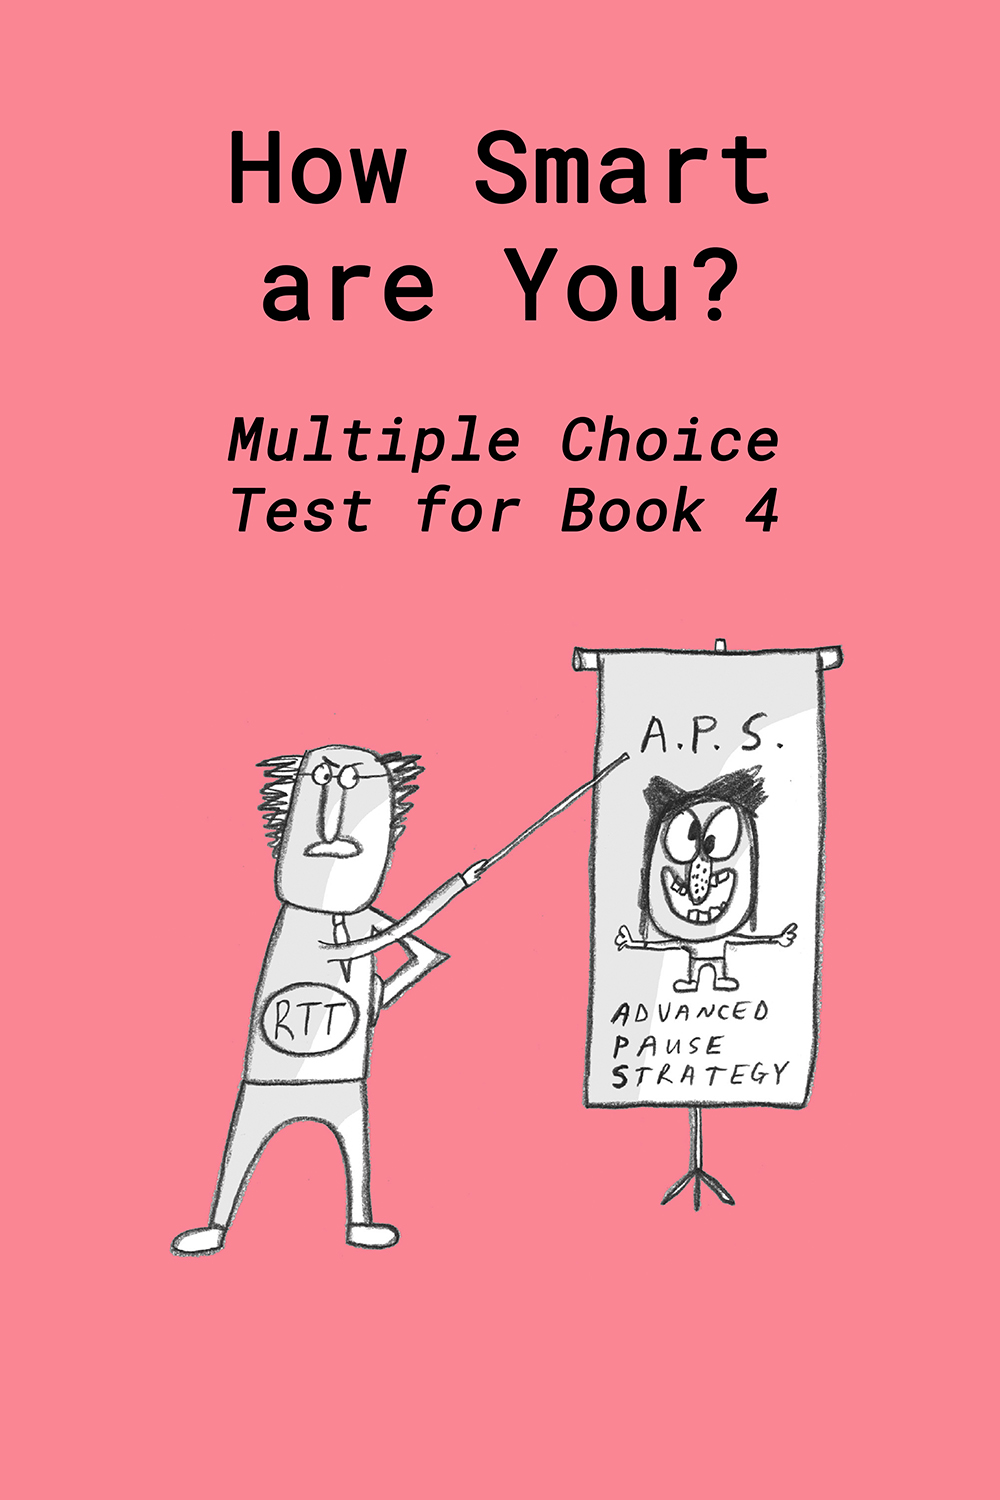 Multiple Choice for Book 4